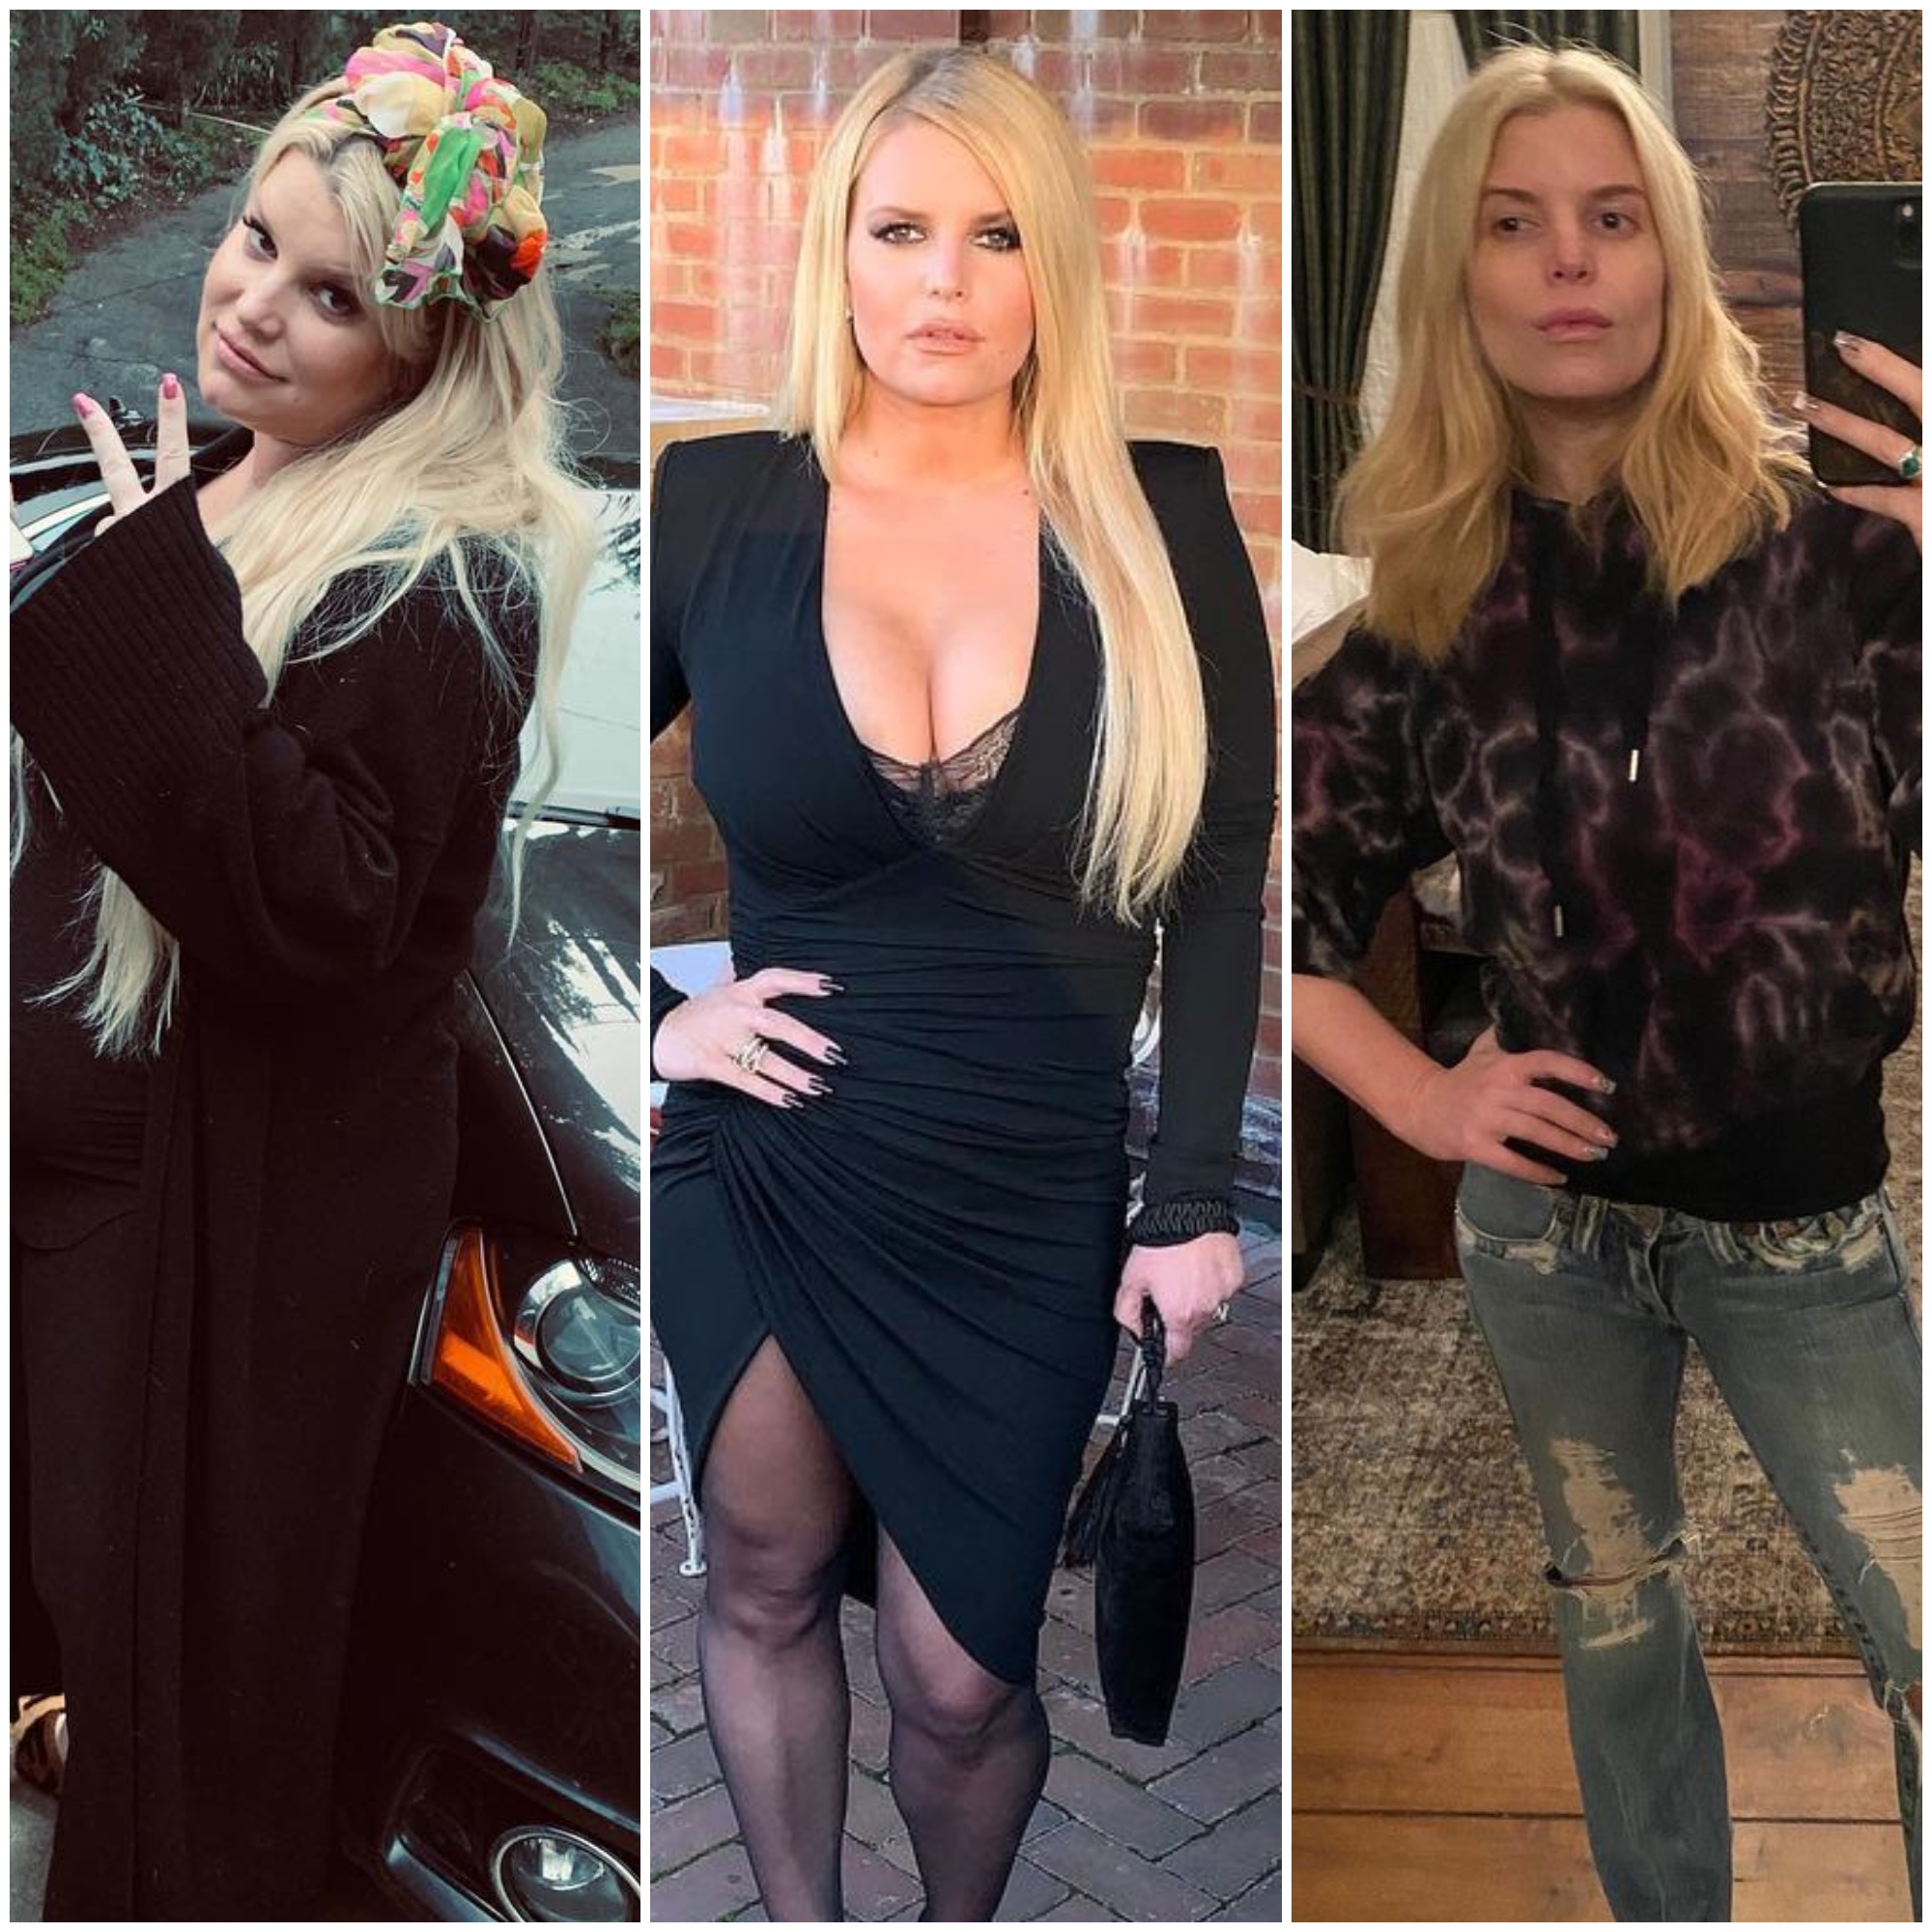 Jessica Simpson's Weight Loss Photos See Singer's Transformation